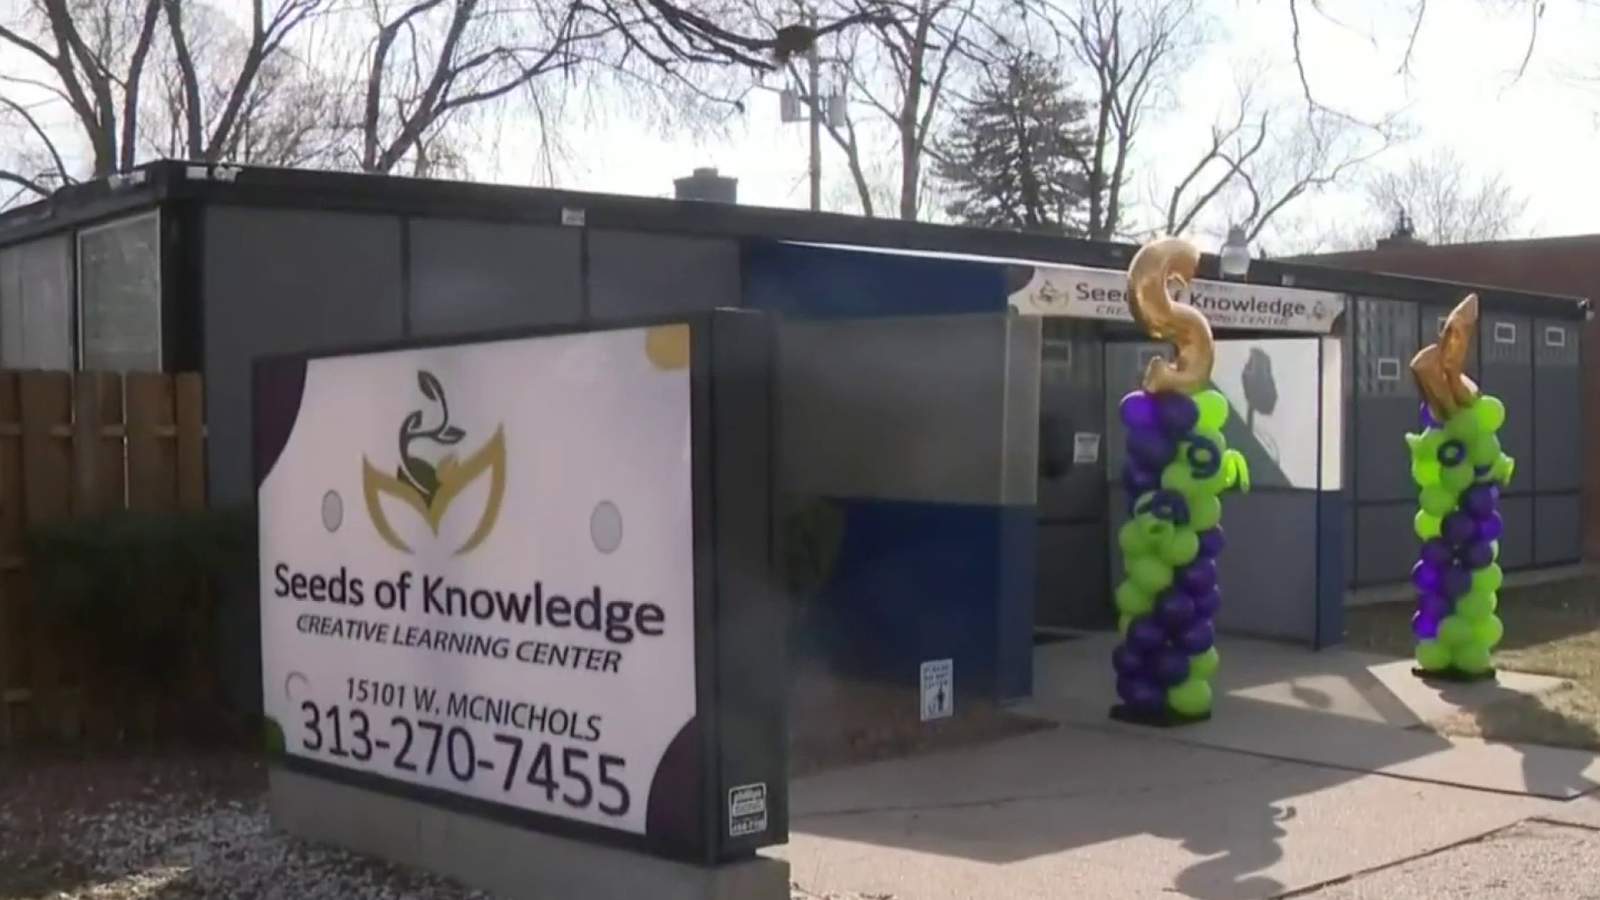 Seeds of Knowledge Creative Learning Center opens in Detroit after receiving Motor City Match grant